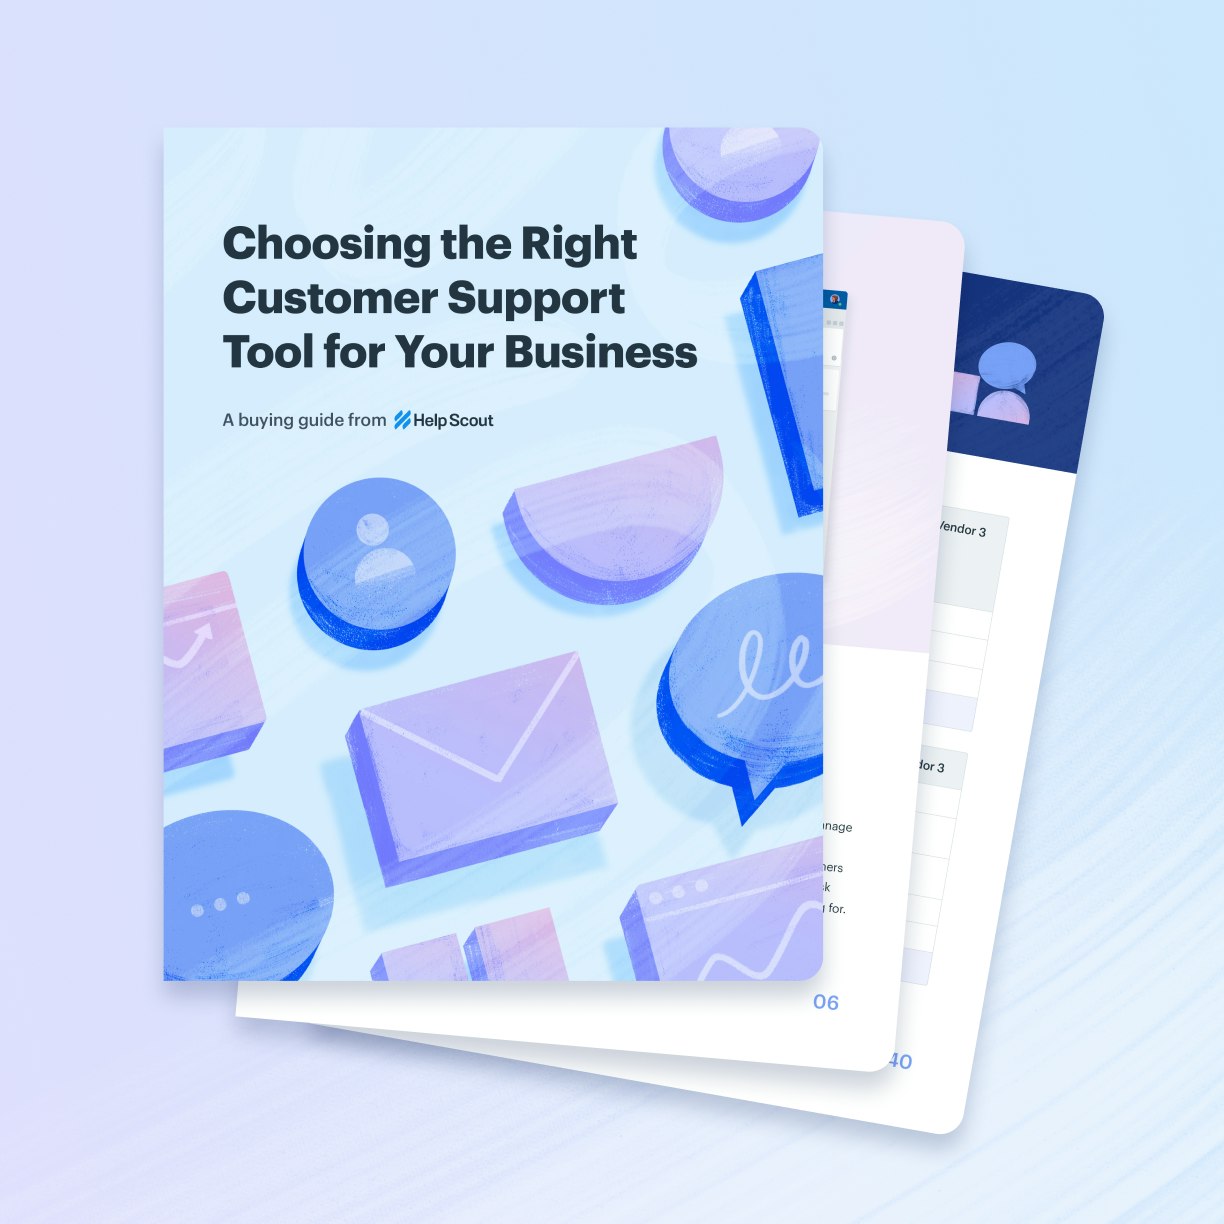  Buyer's Guide to Choosing the Right Customer Support Tool Hero Media